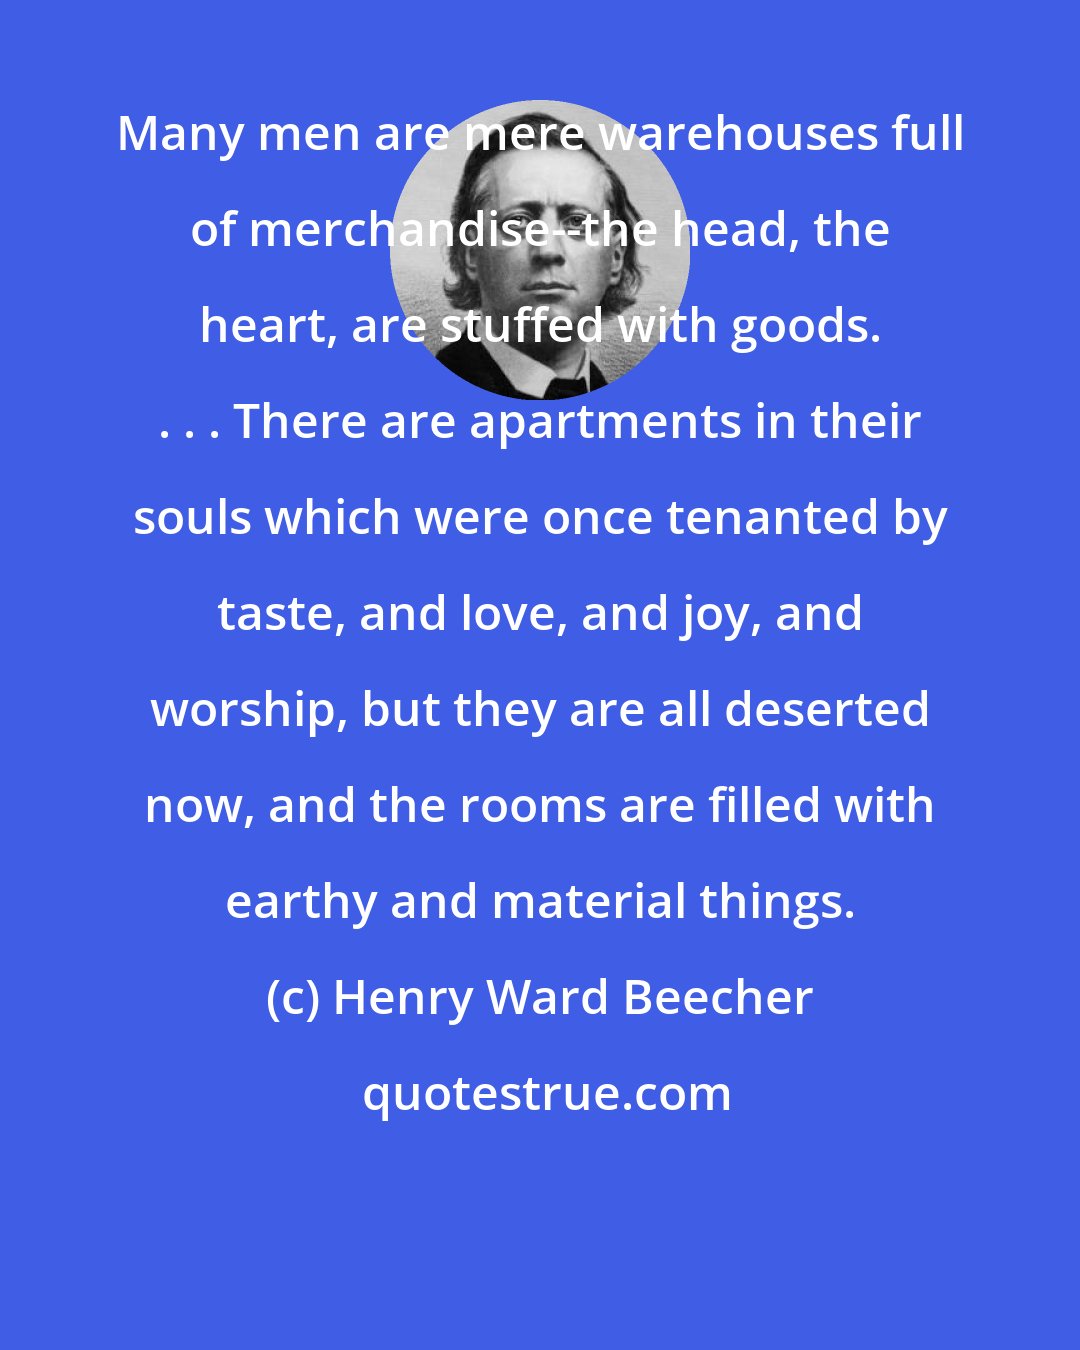 Henry Ward Beecher: Many men are mere warehouses full of merchandise--the head, the heart, are stuffed with goods. . . . There are apartments in their souls which were once tenanted by taste, and love, and joy, and worship, but they are all deserted now, and the rooms are filled with earthy and material things.